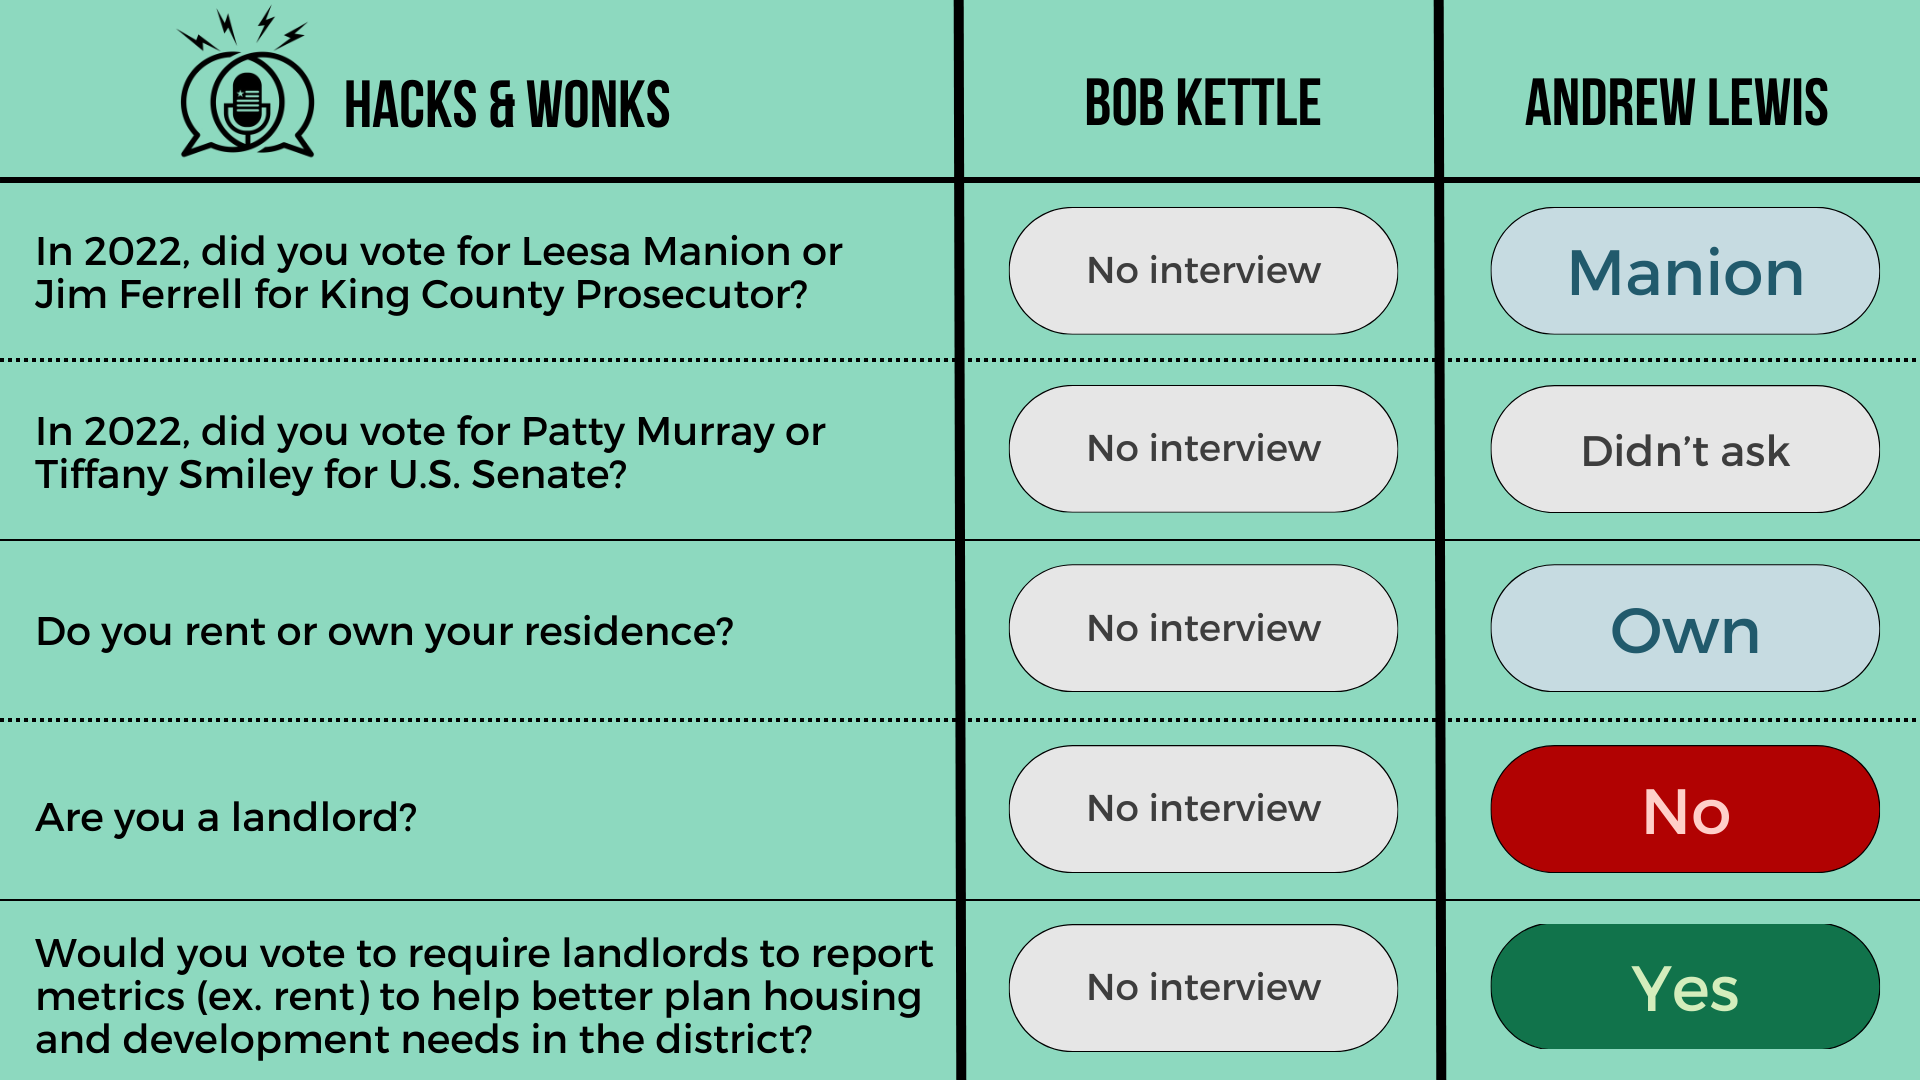 Q: In 2022, did you vote for Leesa Manion or Jim Ferrell for King County Prosecutor? Bob Kettle: No interview, Andrew Lewis: Manion  Q: In 2022, did you vote for Patty Murray or Tiffany Smiley for U.S. Senate? Bob Kettle: No interview, Andrew Lewis: